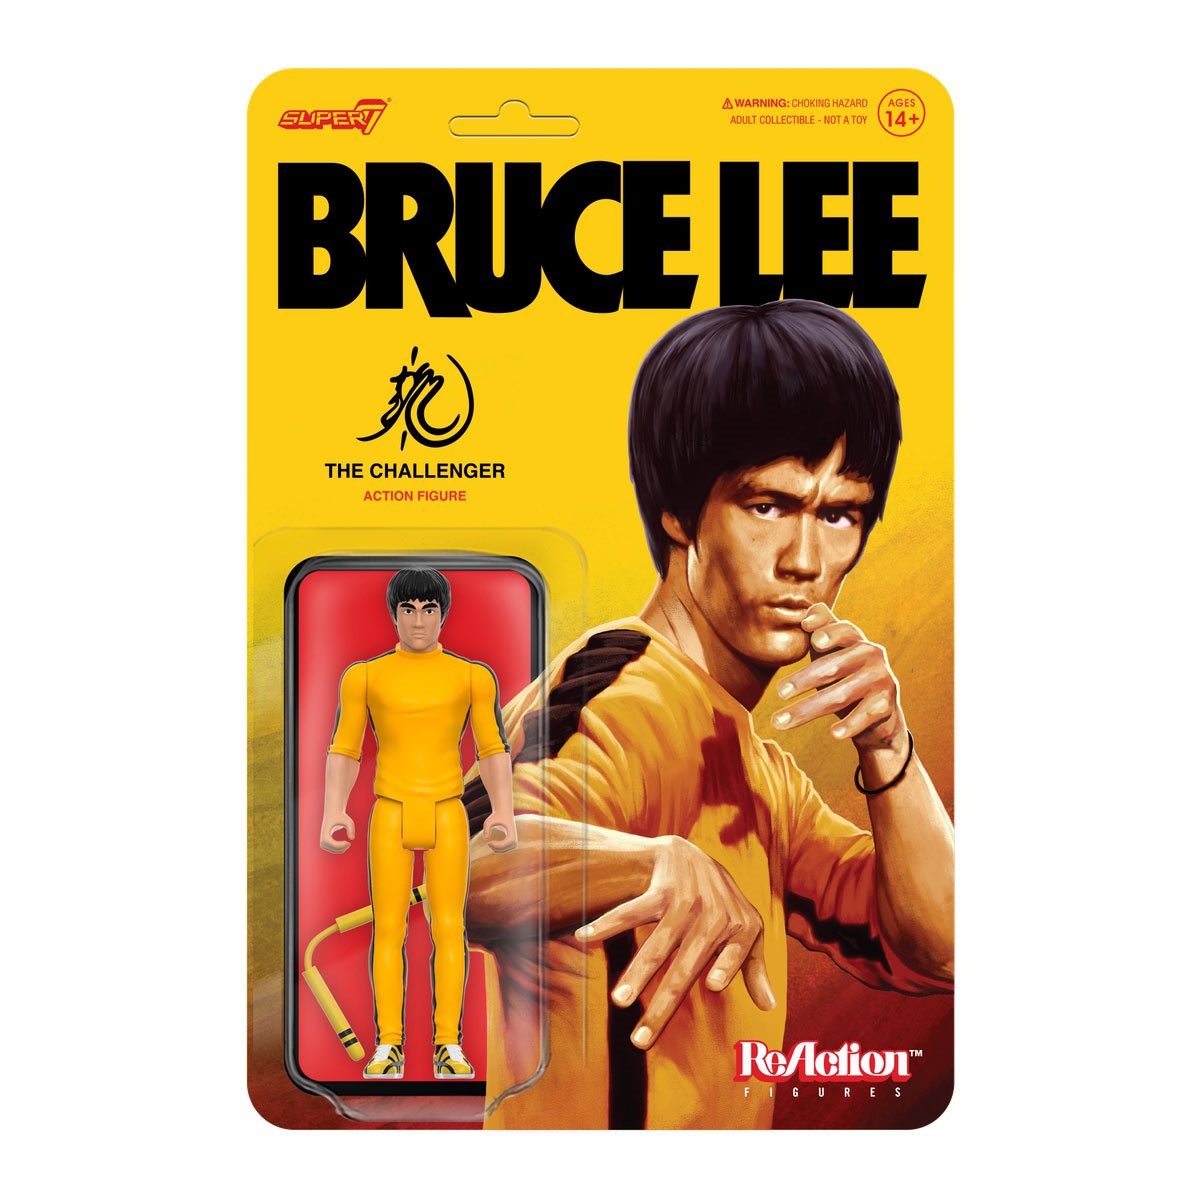 Bruce Lee ReAction Figure - Bruce Lee as "The Challenger"